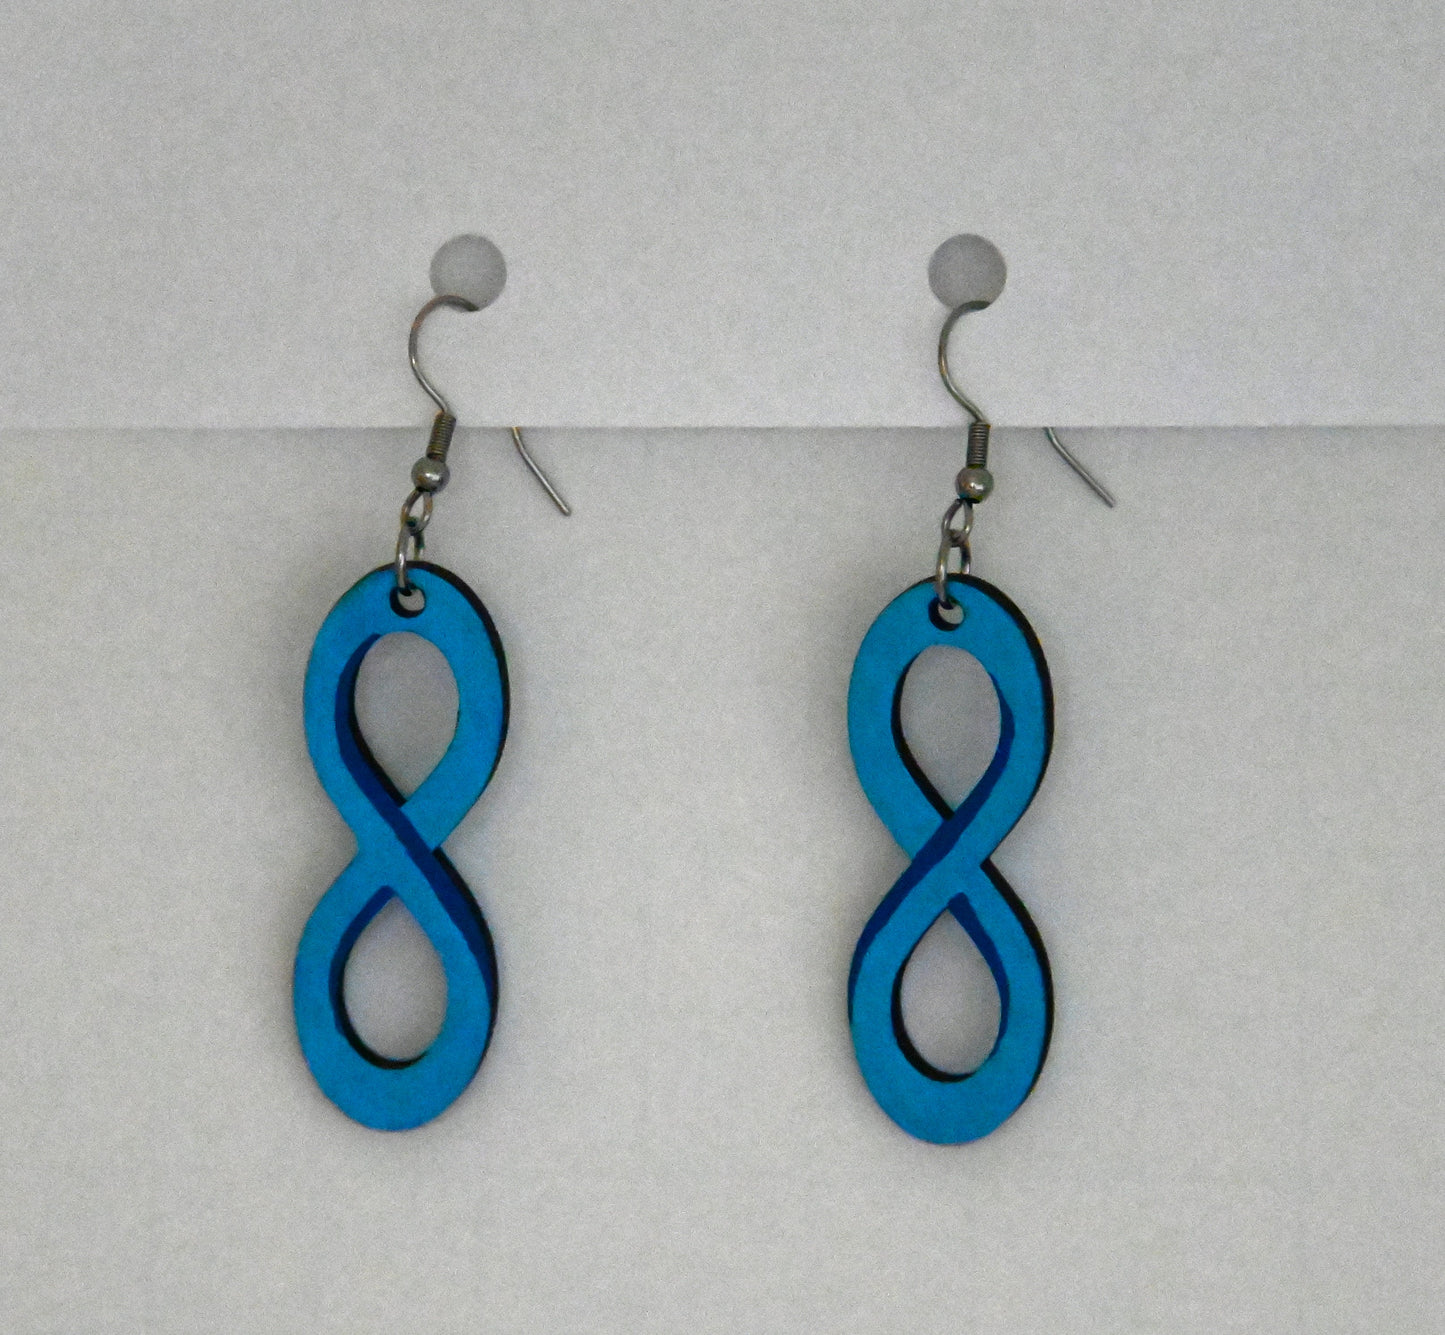 Compassion Earrings (4 pairs)